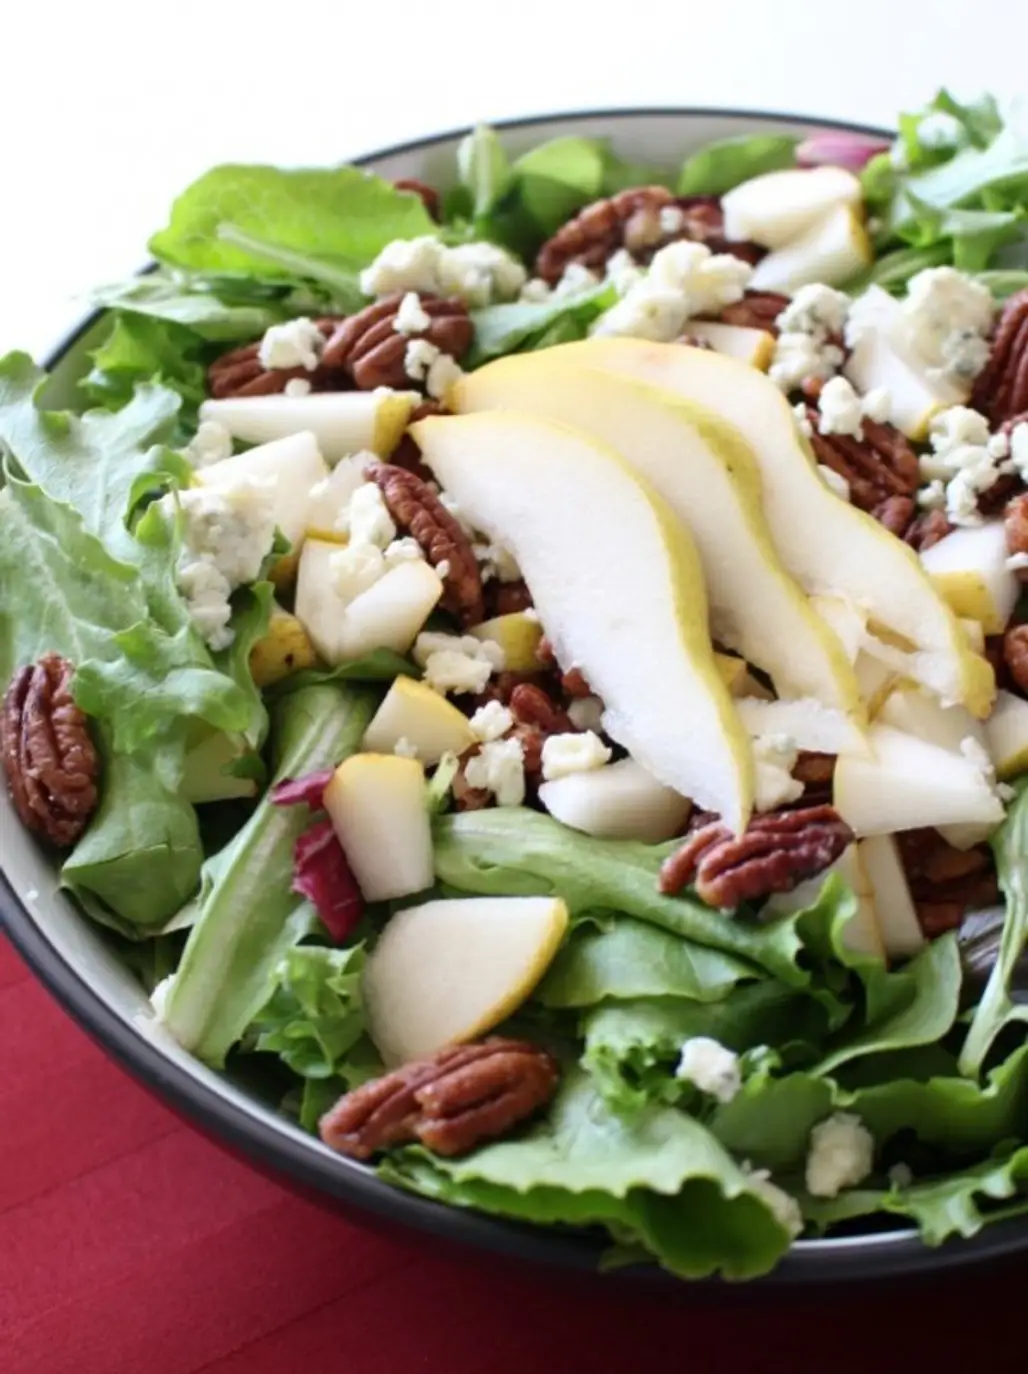 Pear, Pecan and Blue Cheese Salad with a Tangy Dijon Vinaigrette